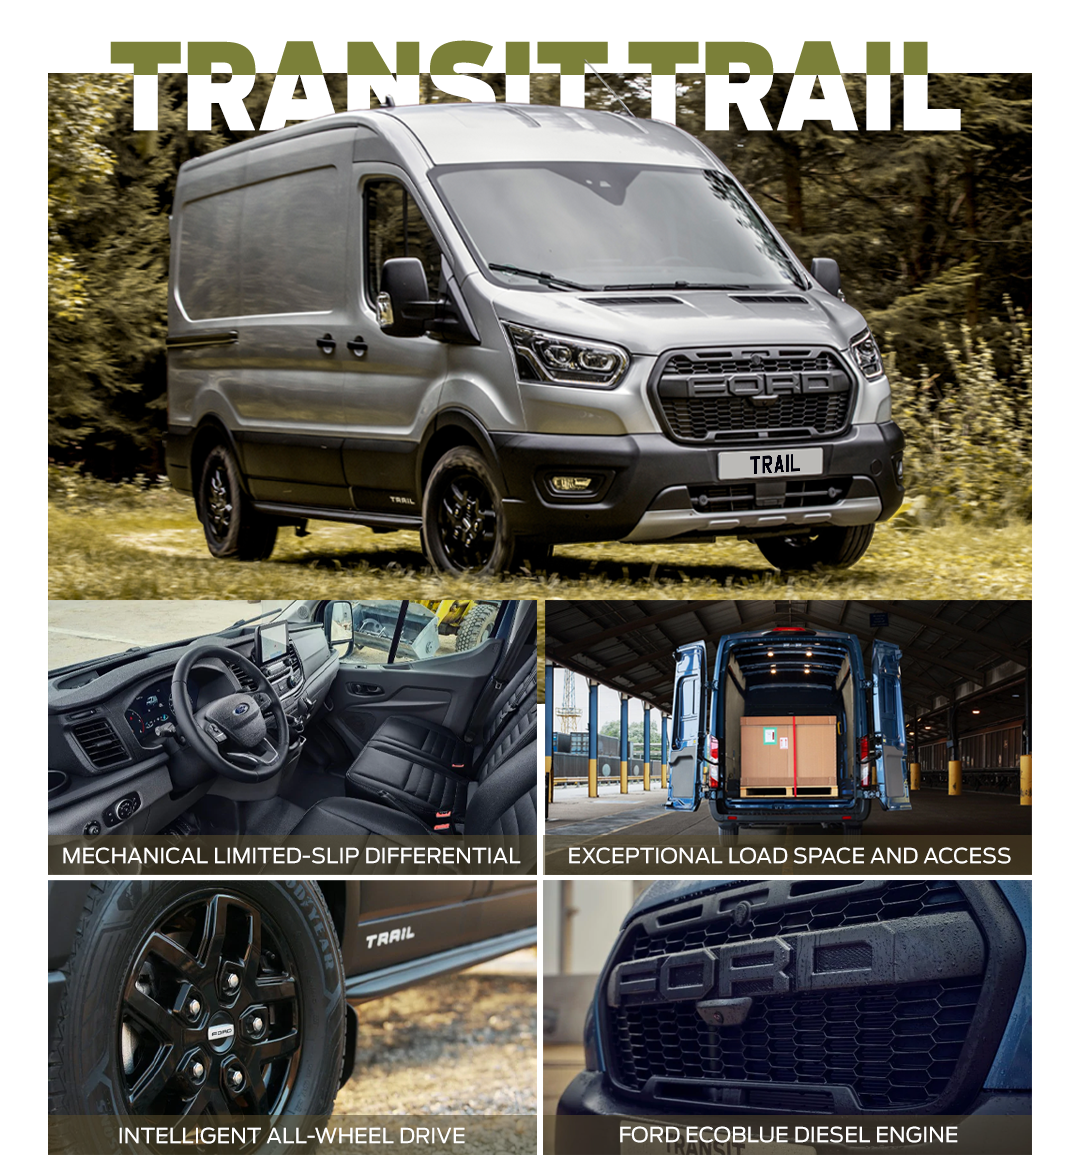 New Ford Transit Trail Van for Sale TC Harrison Ford